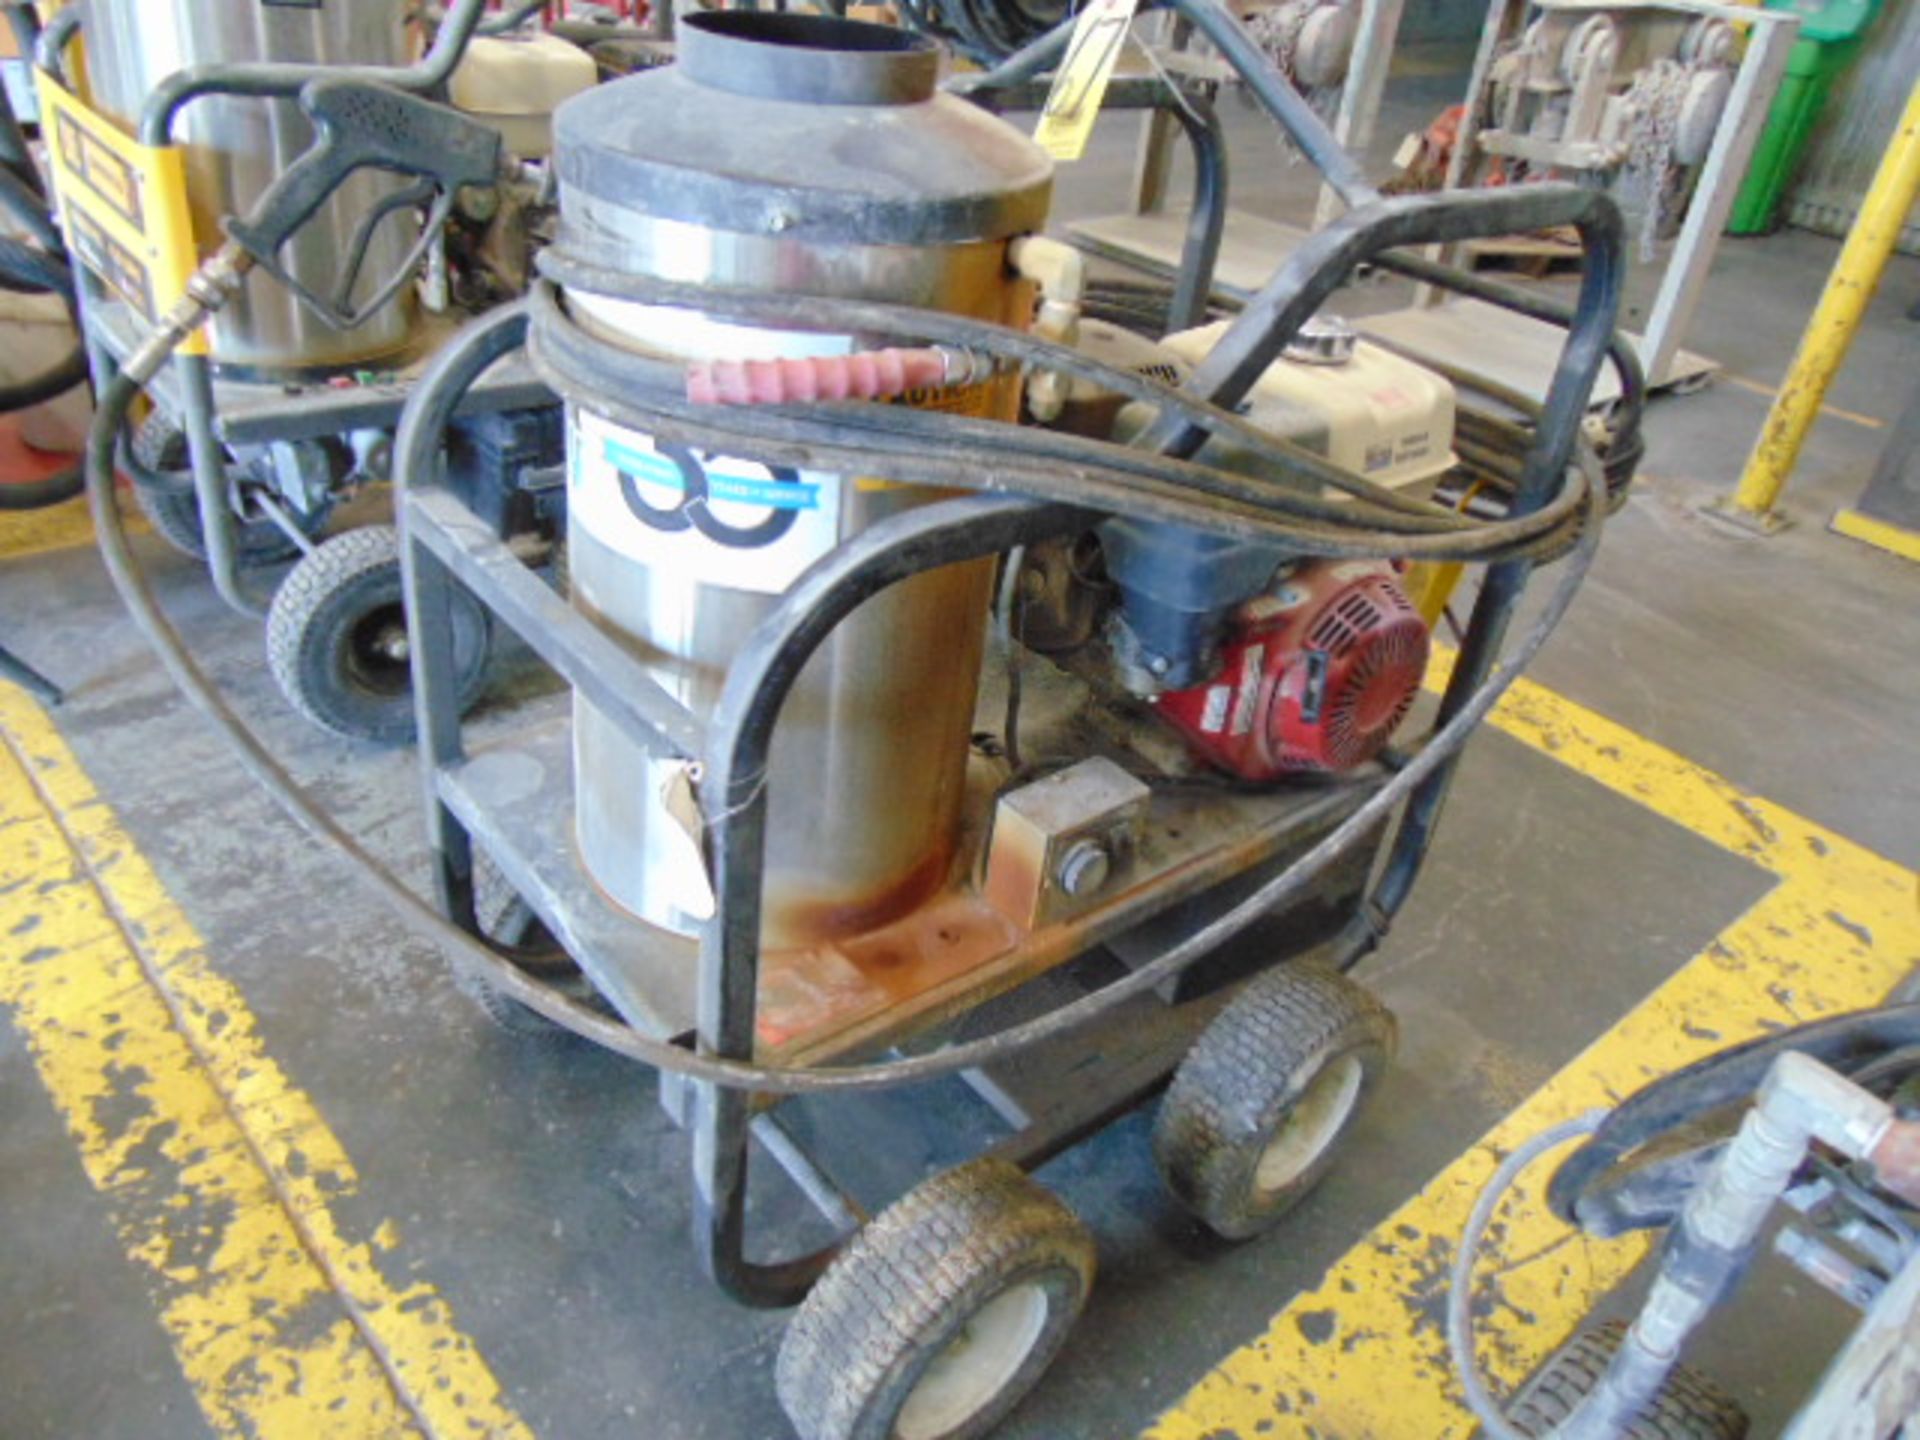 HOT WATER PRESSURE WASHER, WATER CANNON, 4200 PSI, Honda gas engine, electric water heater - Image 2 of 4